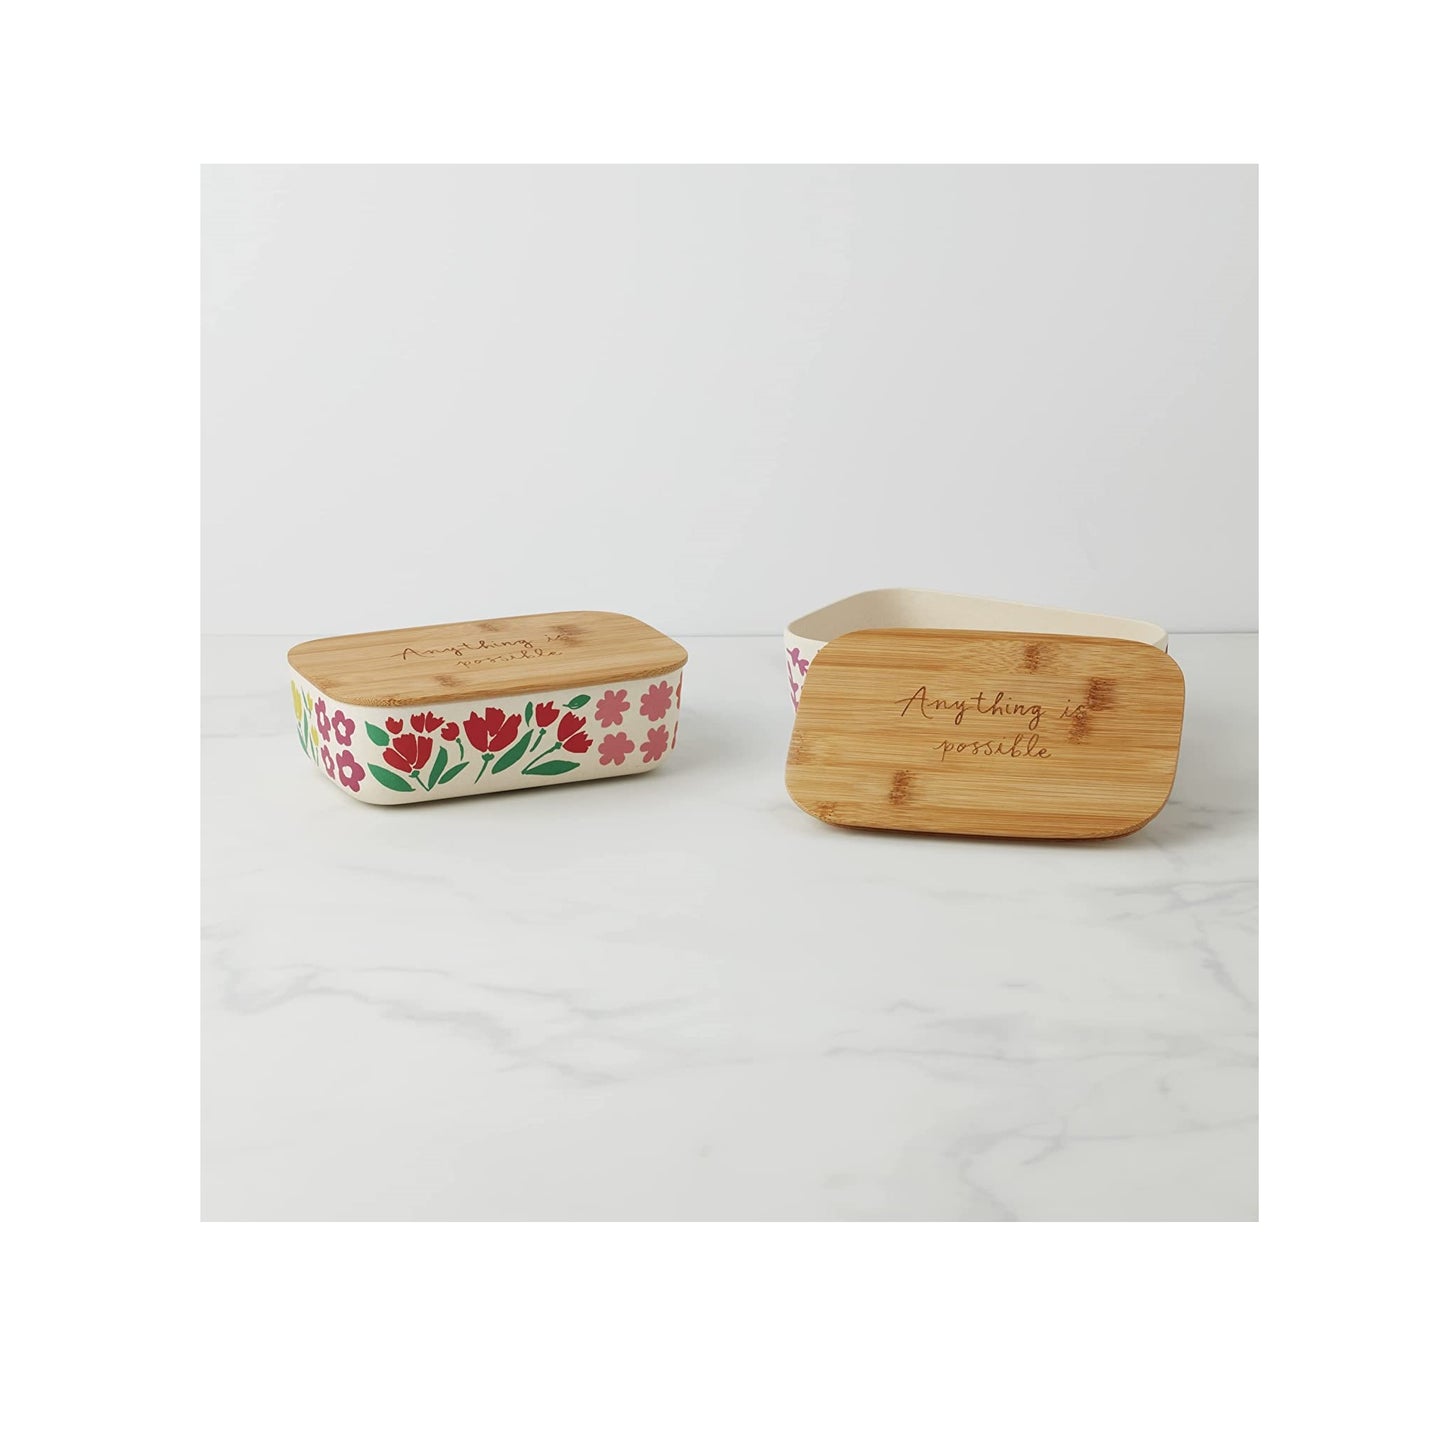 Kate Spade Floral Field™ Lunch Set Rectangle Container, set of 2